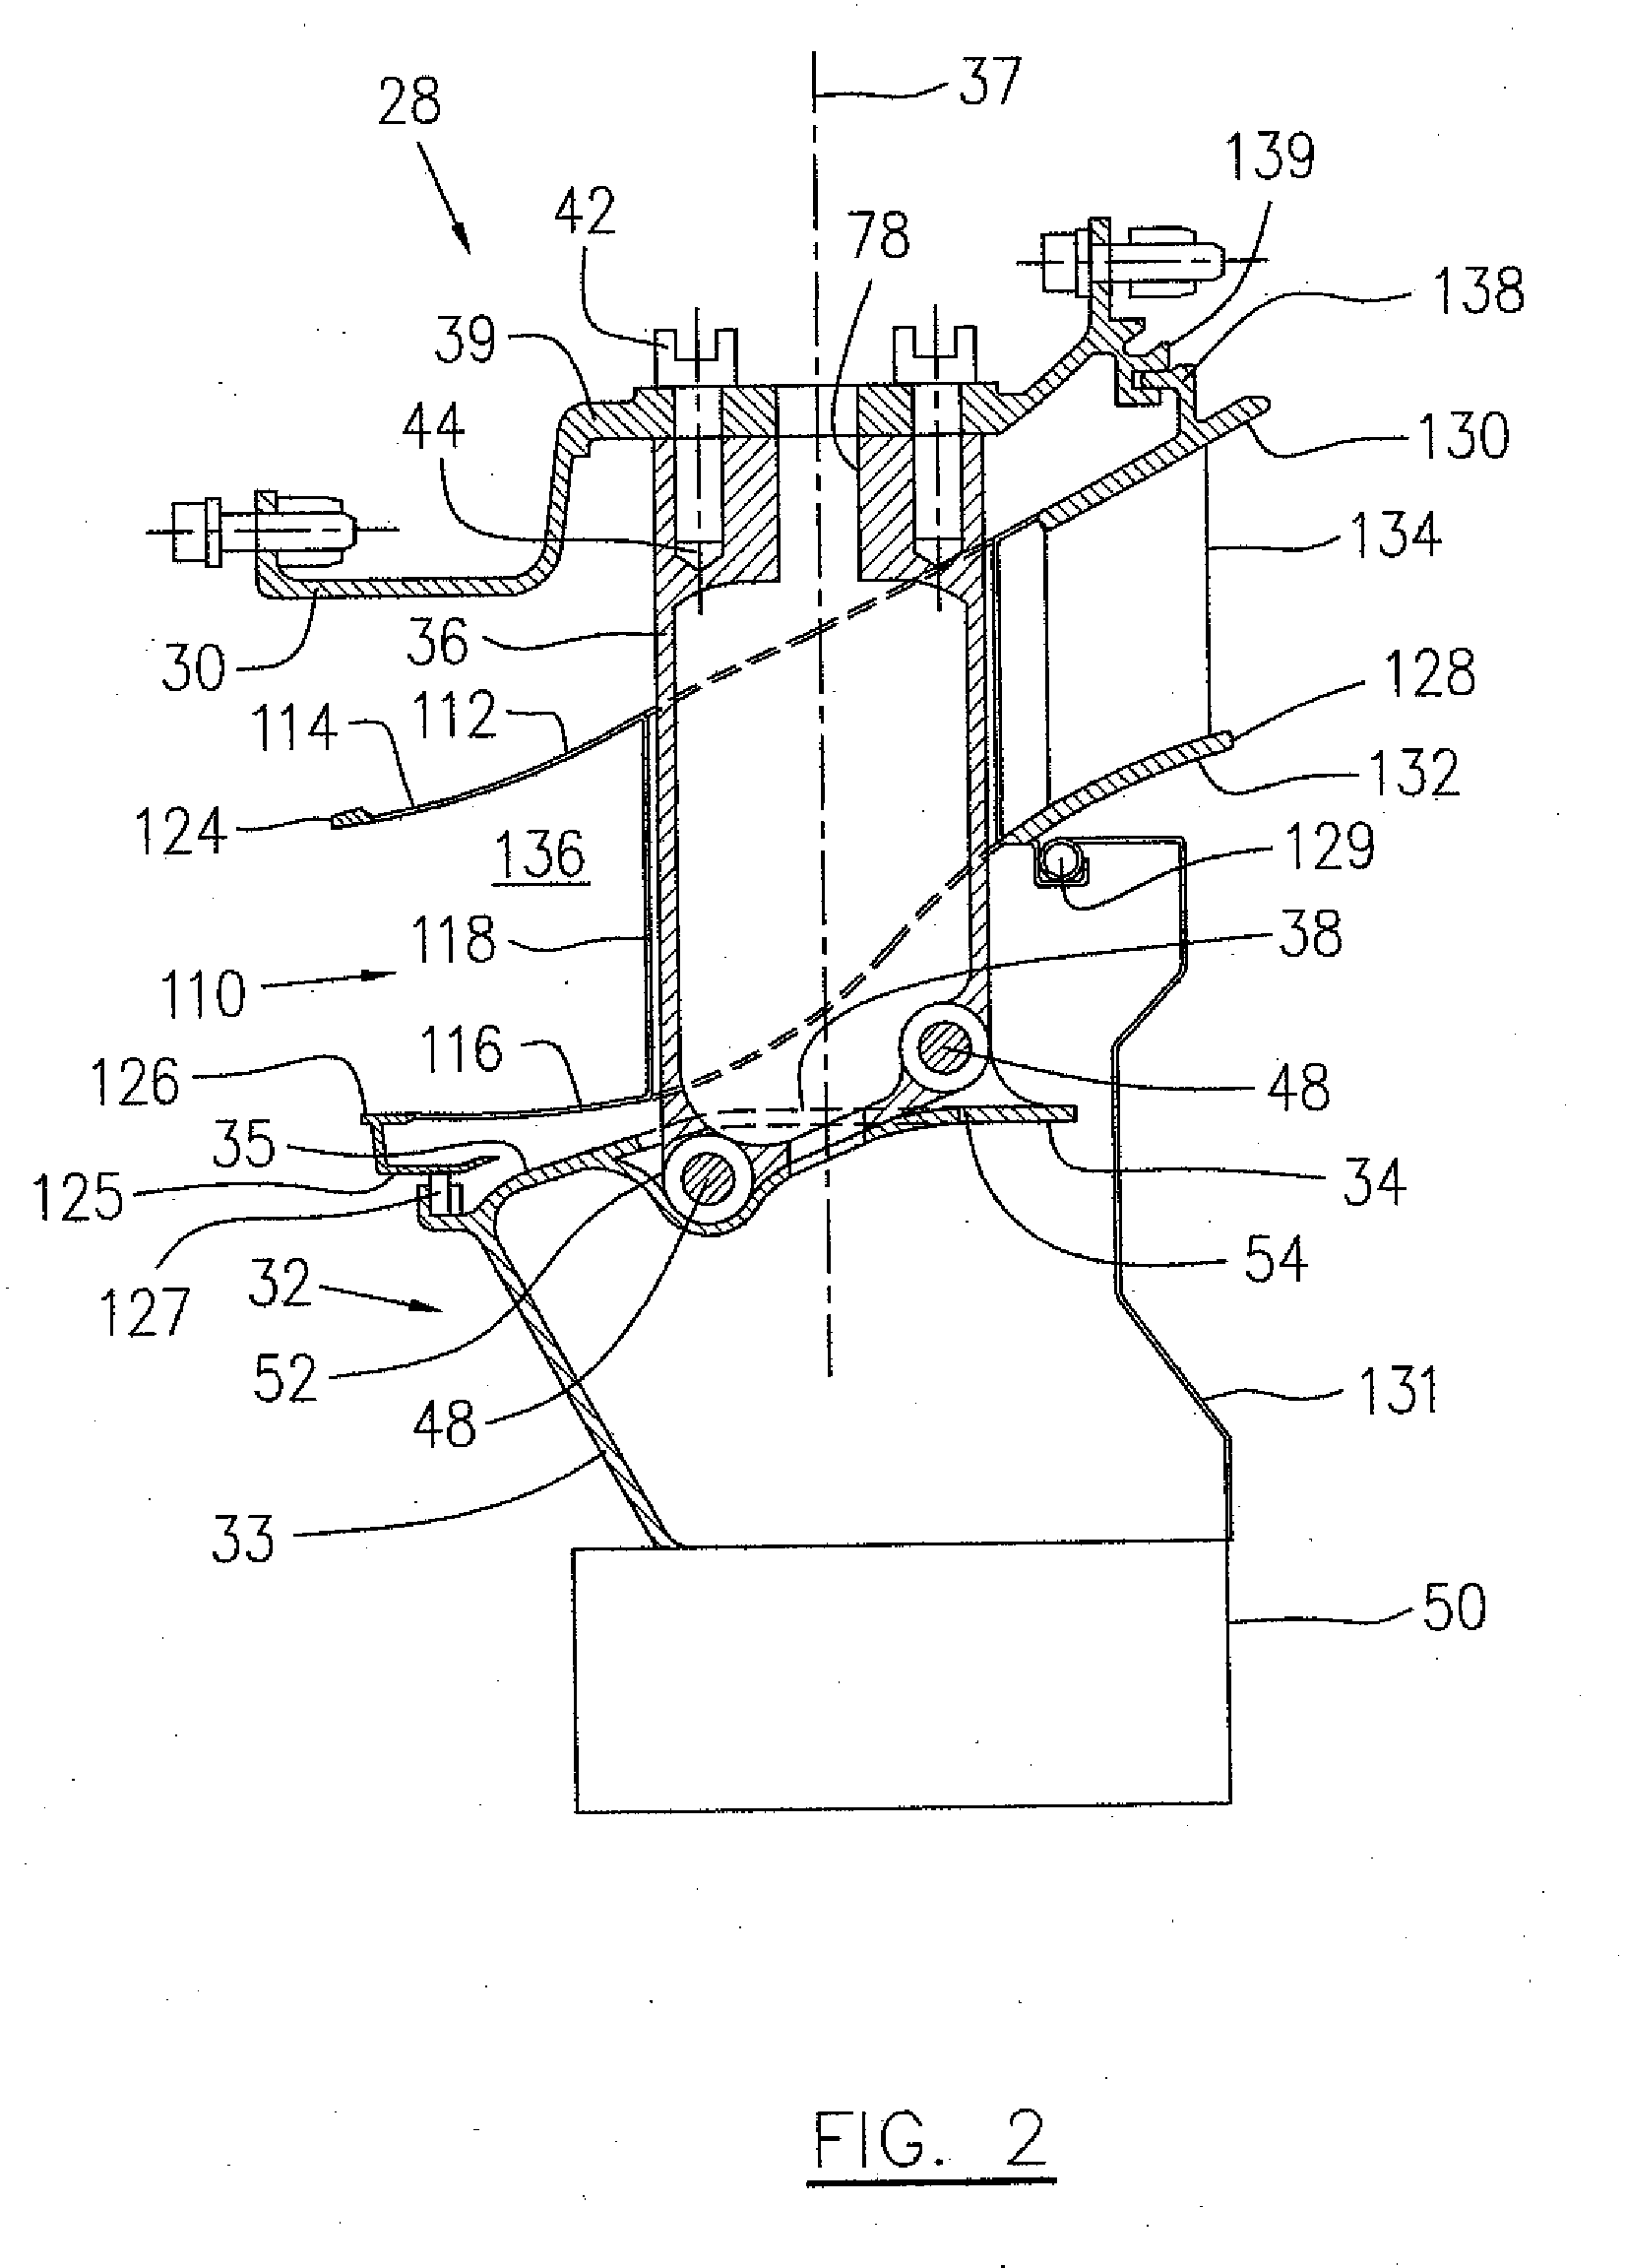 Fabricated itd-strut and vane ring for gas turbine engine